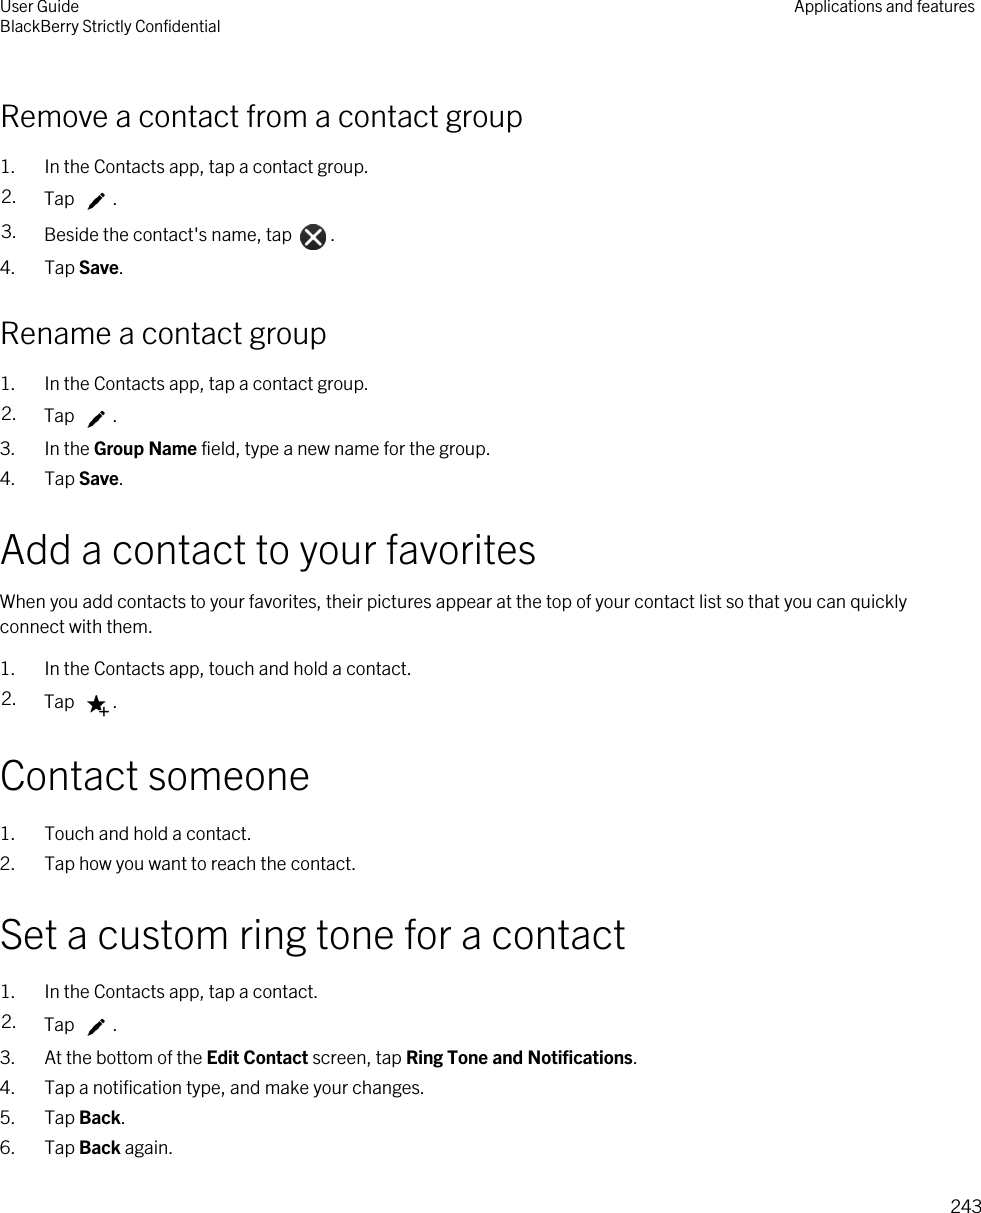 Remove a contact from a contact group1. In the Contacts app, tap a contact group.2. Tap  .3. Beside the contact&apos;s name, tap  .4. Tap Save.Rename a contact group1. In the Contacts app, tap a contact group.2. Tap  .3. In the Group Name field, type a new name for the group.4. Tap Save.Add a contact to your favoritesWhen you add contacts to your favorites, their pictures appear at the top of your contact list so that you can quickly connect with them.1. In the Contacts app, touch and hold a contact.2. Tap  .Contact someone1. Touch and hold a contact.2. Tap how you want to reach the contact.Set a custom ring tone for a contact1. In the Contacts app, tap a contact.2. Tap  .3. At the bottom of the Edit Contact screen, tap Ring Tone and Notifications.4. Tap a notification type, and make your changes.5. Tap Back.6. Tap Back again.User GuideBlackBerry Strictly Confidential Applications and features243